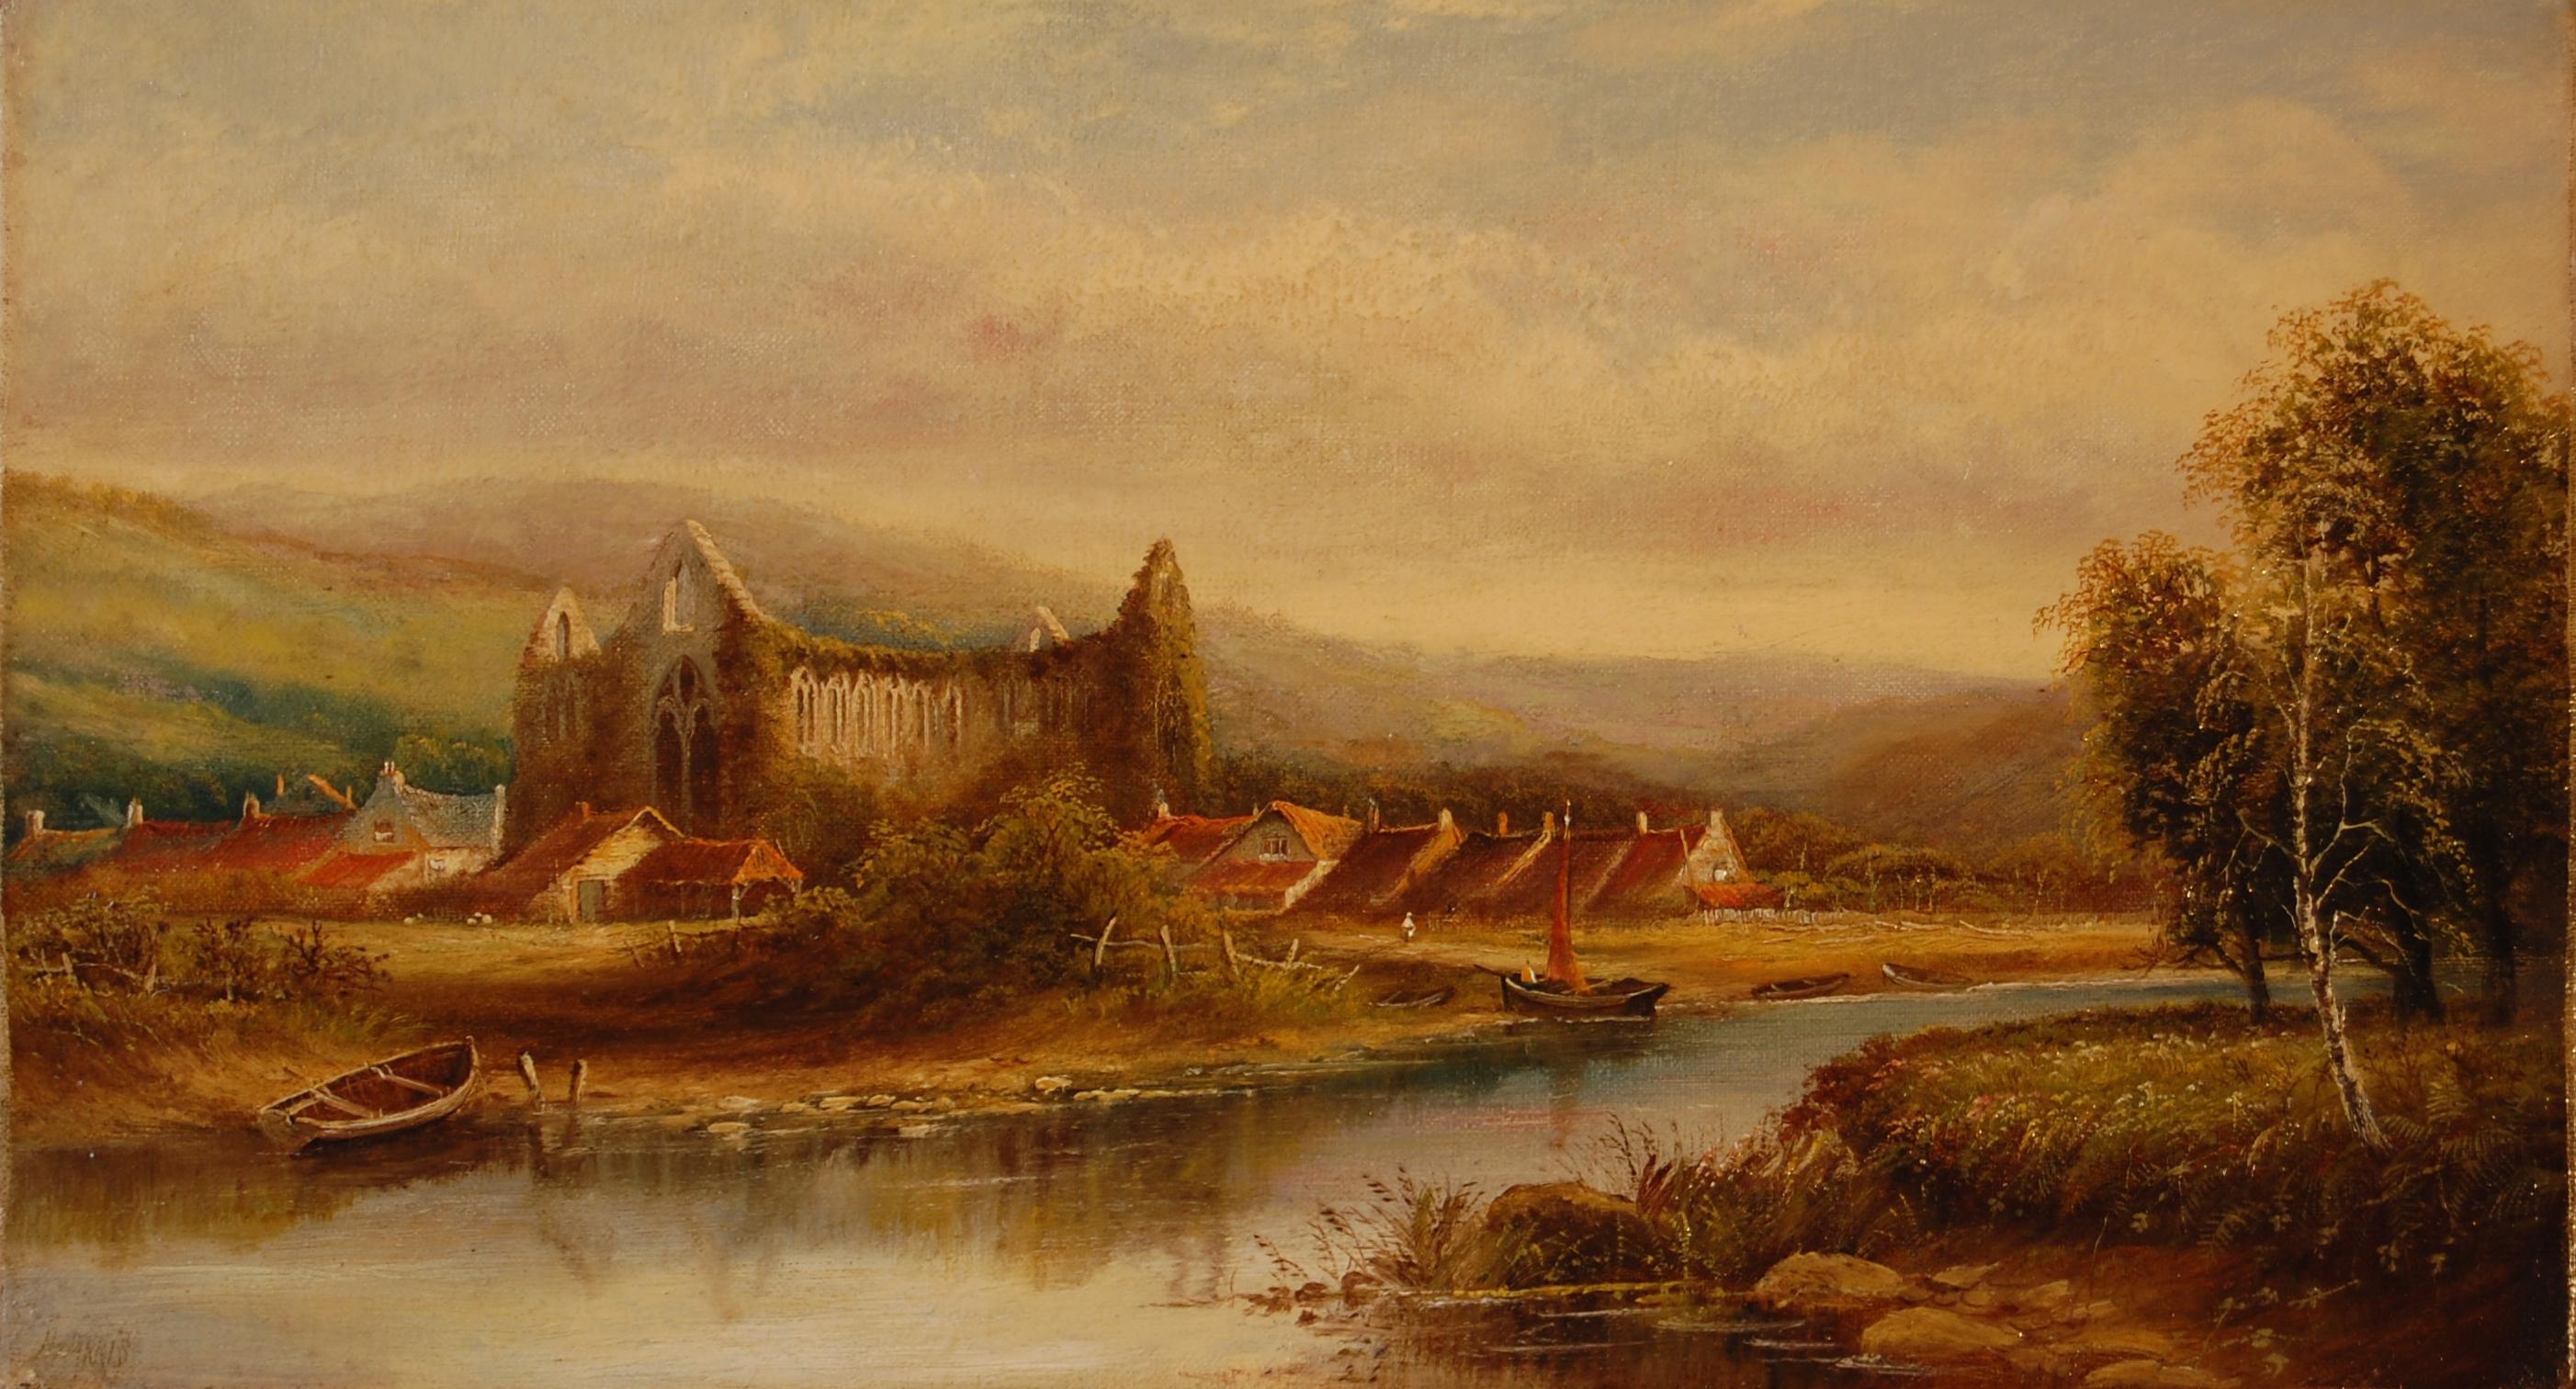 Victorian Oil Painting of Tintern Abbey Wales ruins in River landscape, Framed